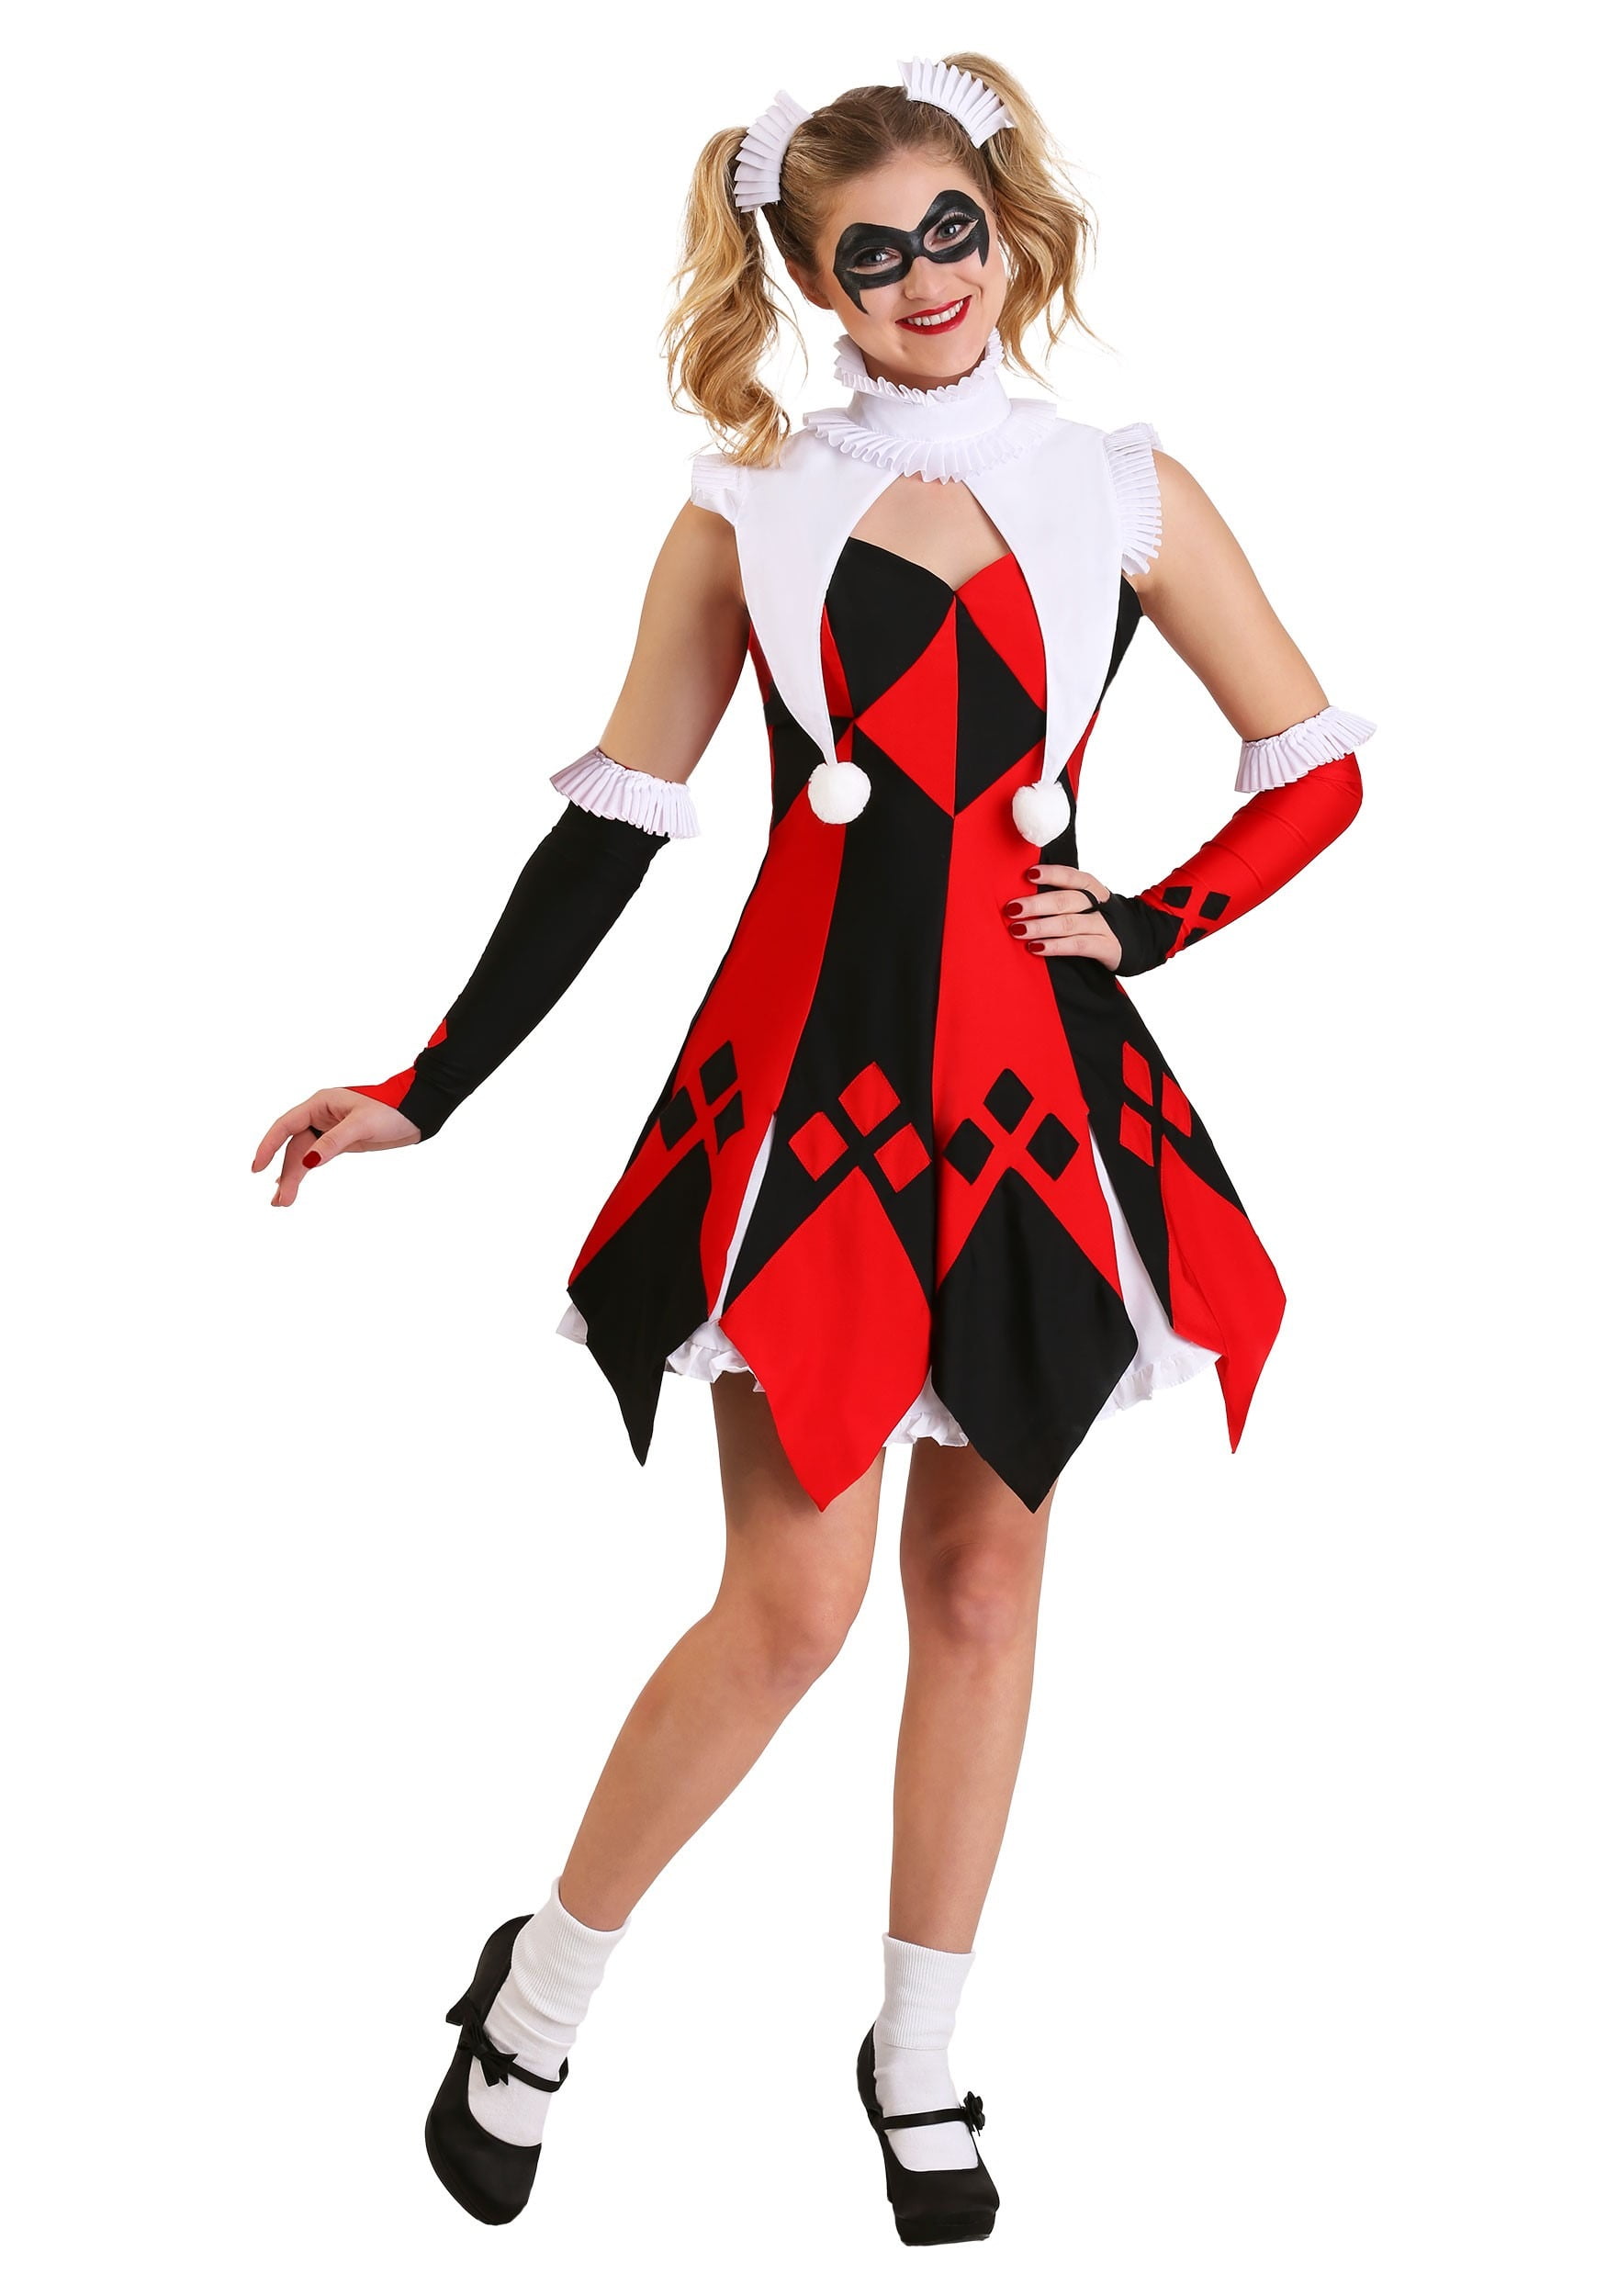 Adult Ladies Harlequin Honey Jester Halloween Fancy Dress Costume Outfit 